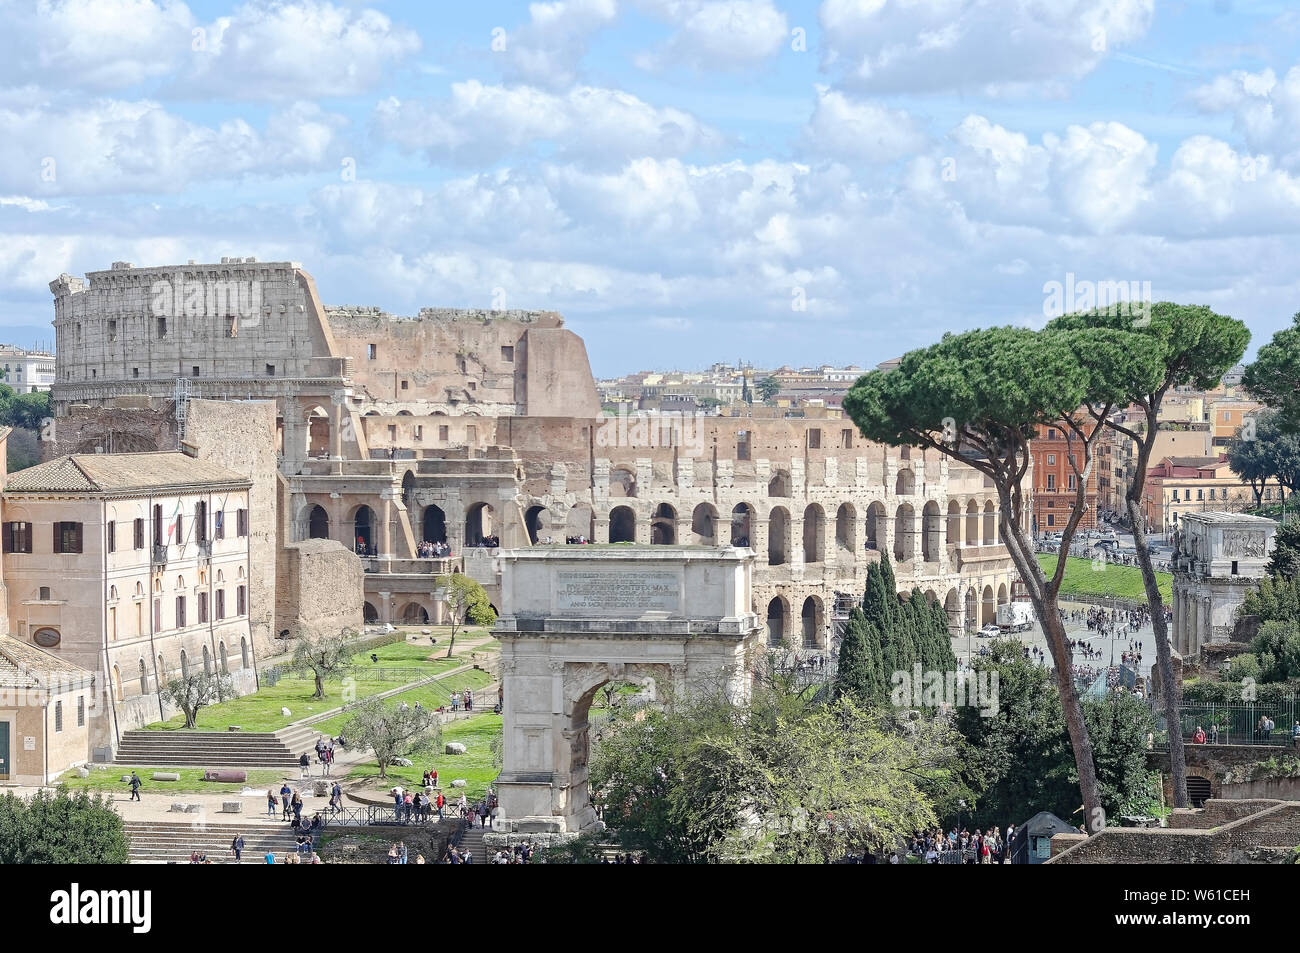 A view of Coliseum of Roman from Palatine hell. A front view of Arch of Constantine is distinguish. At the right,a view of Arch of Tito is also clear. Stock Photo